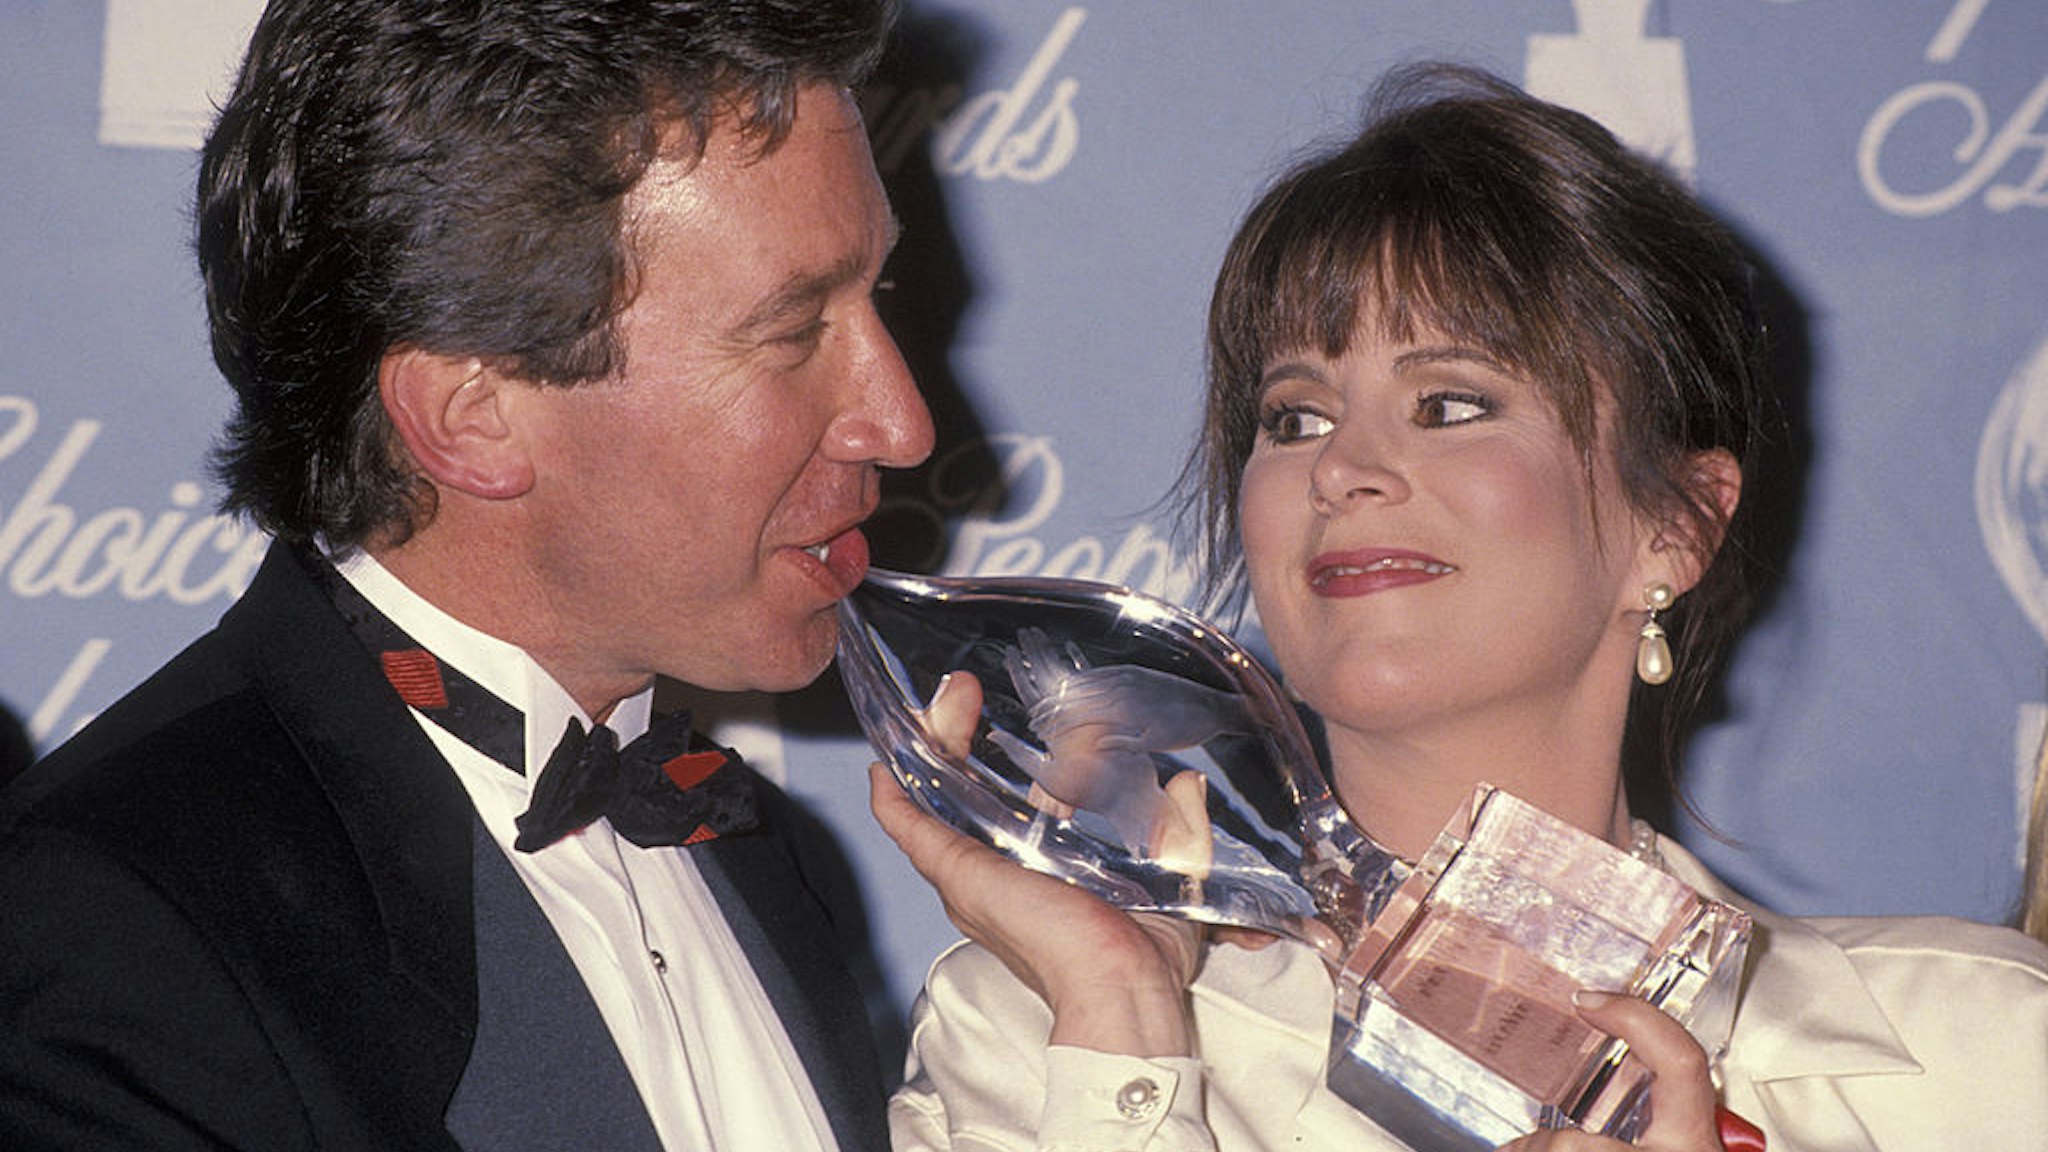 Tim Allen and Patricia Richardson during 18th Annual People's Choice Awards at Universal Studios in Universal City, California, United States. (Photo by Ron Galella/Ron Galella Collection via Getty Images)